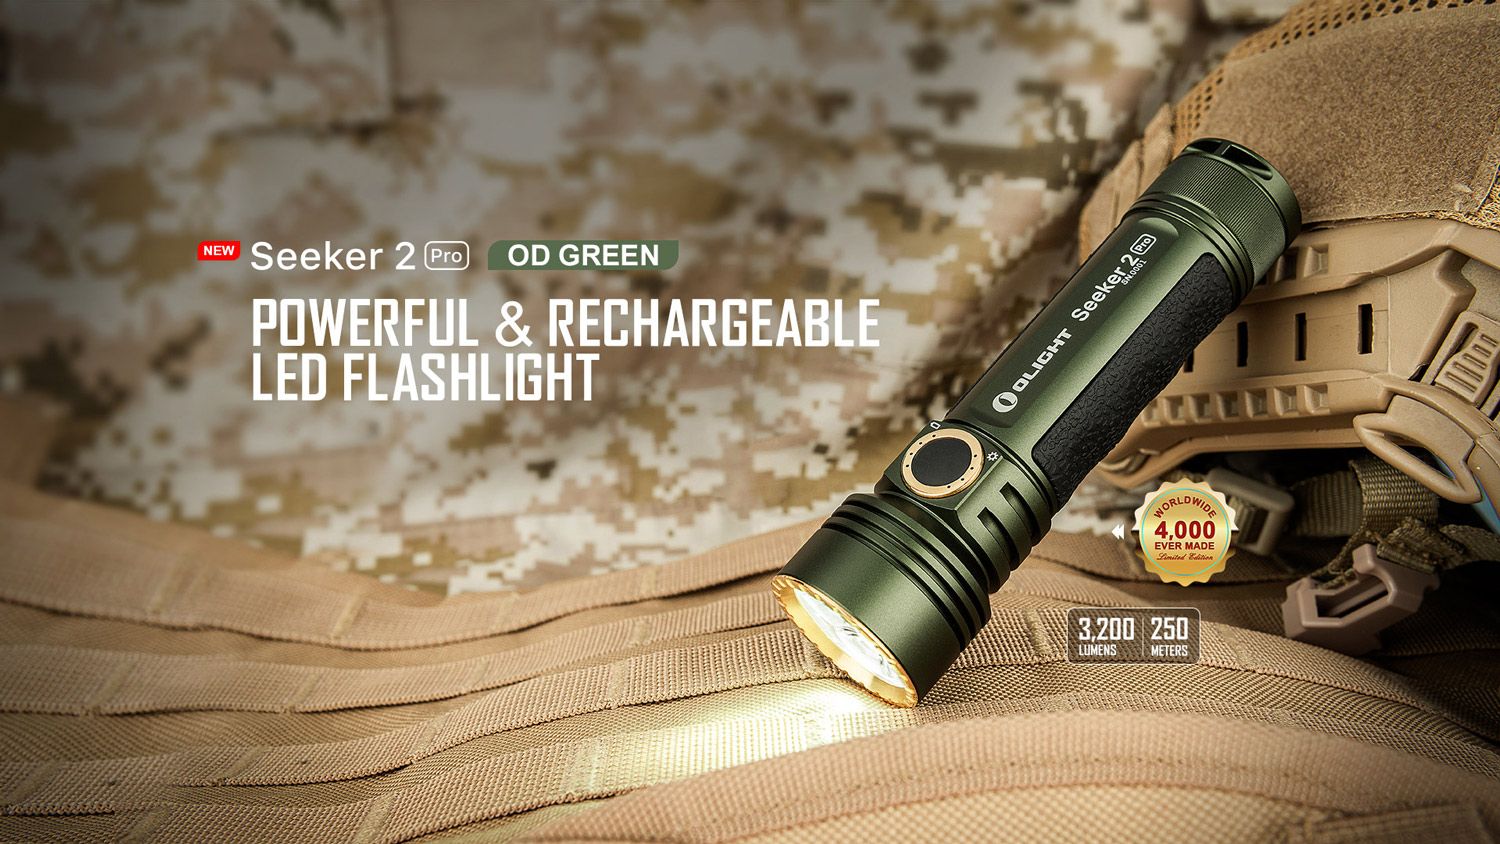 Olight Seeker 2 Pro 3200 Lumens Rechargeable LED Tactical Flashlight with L-dock 